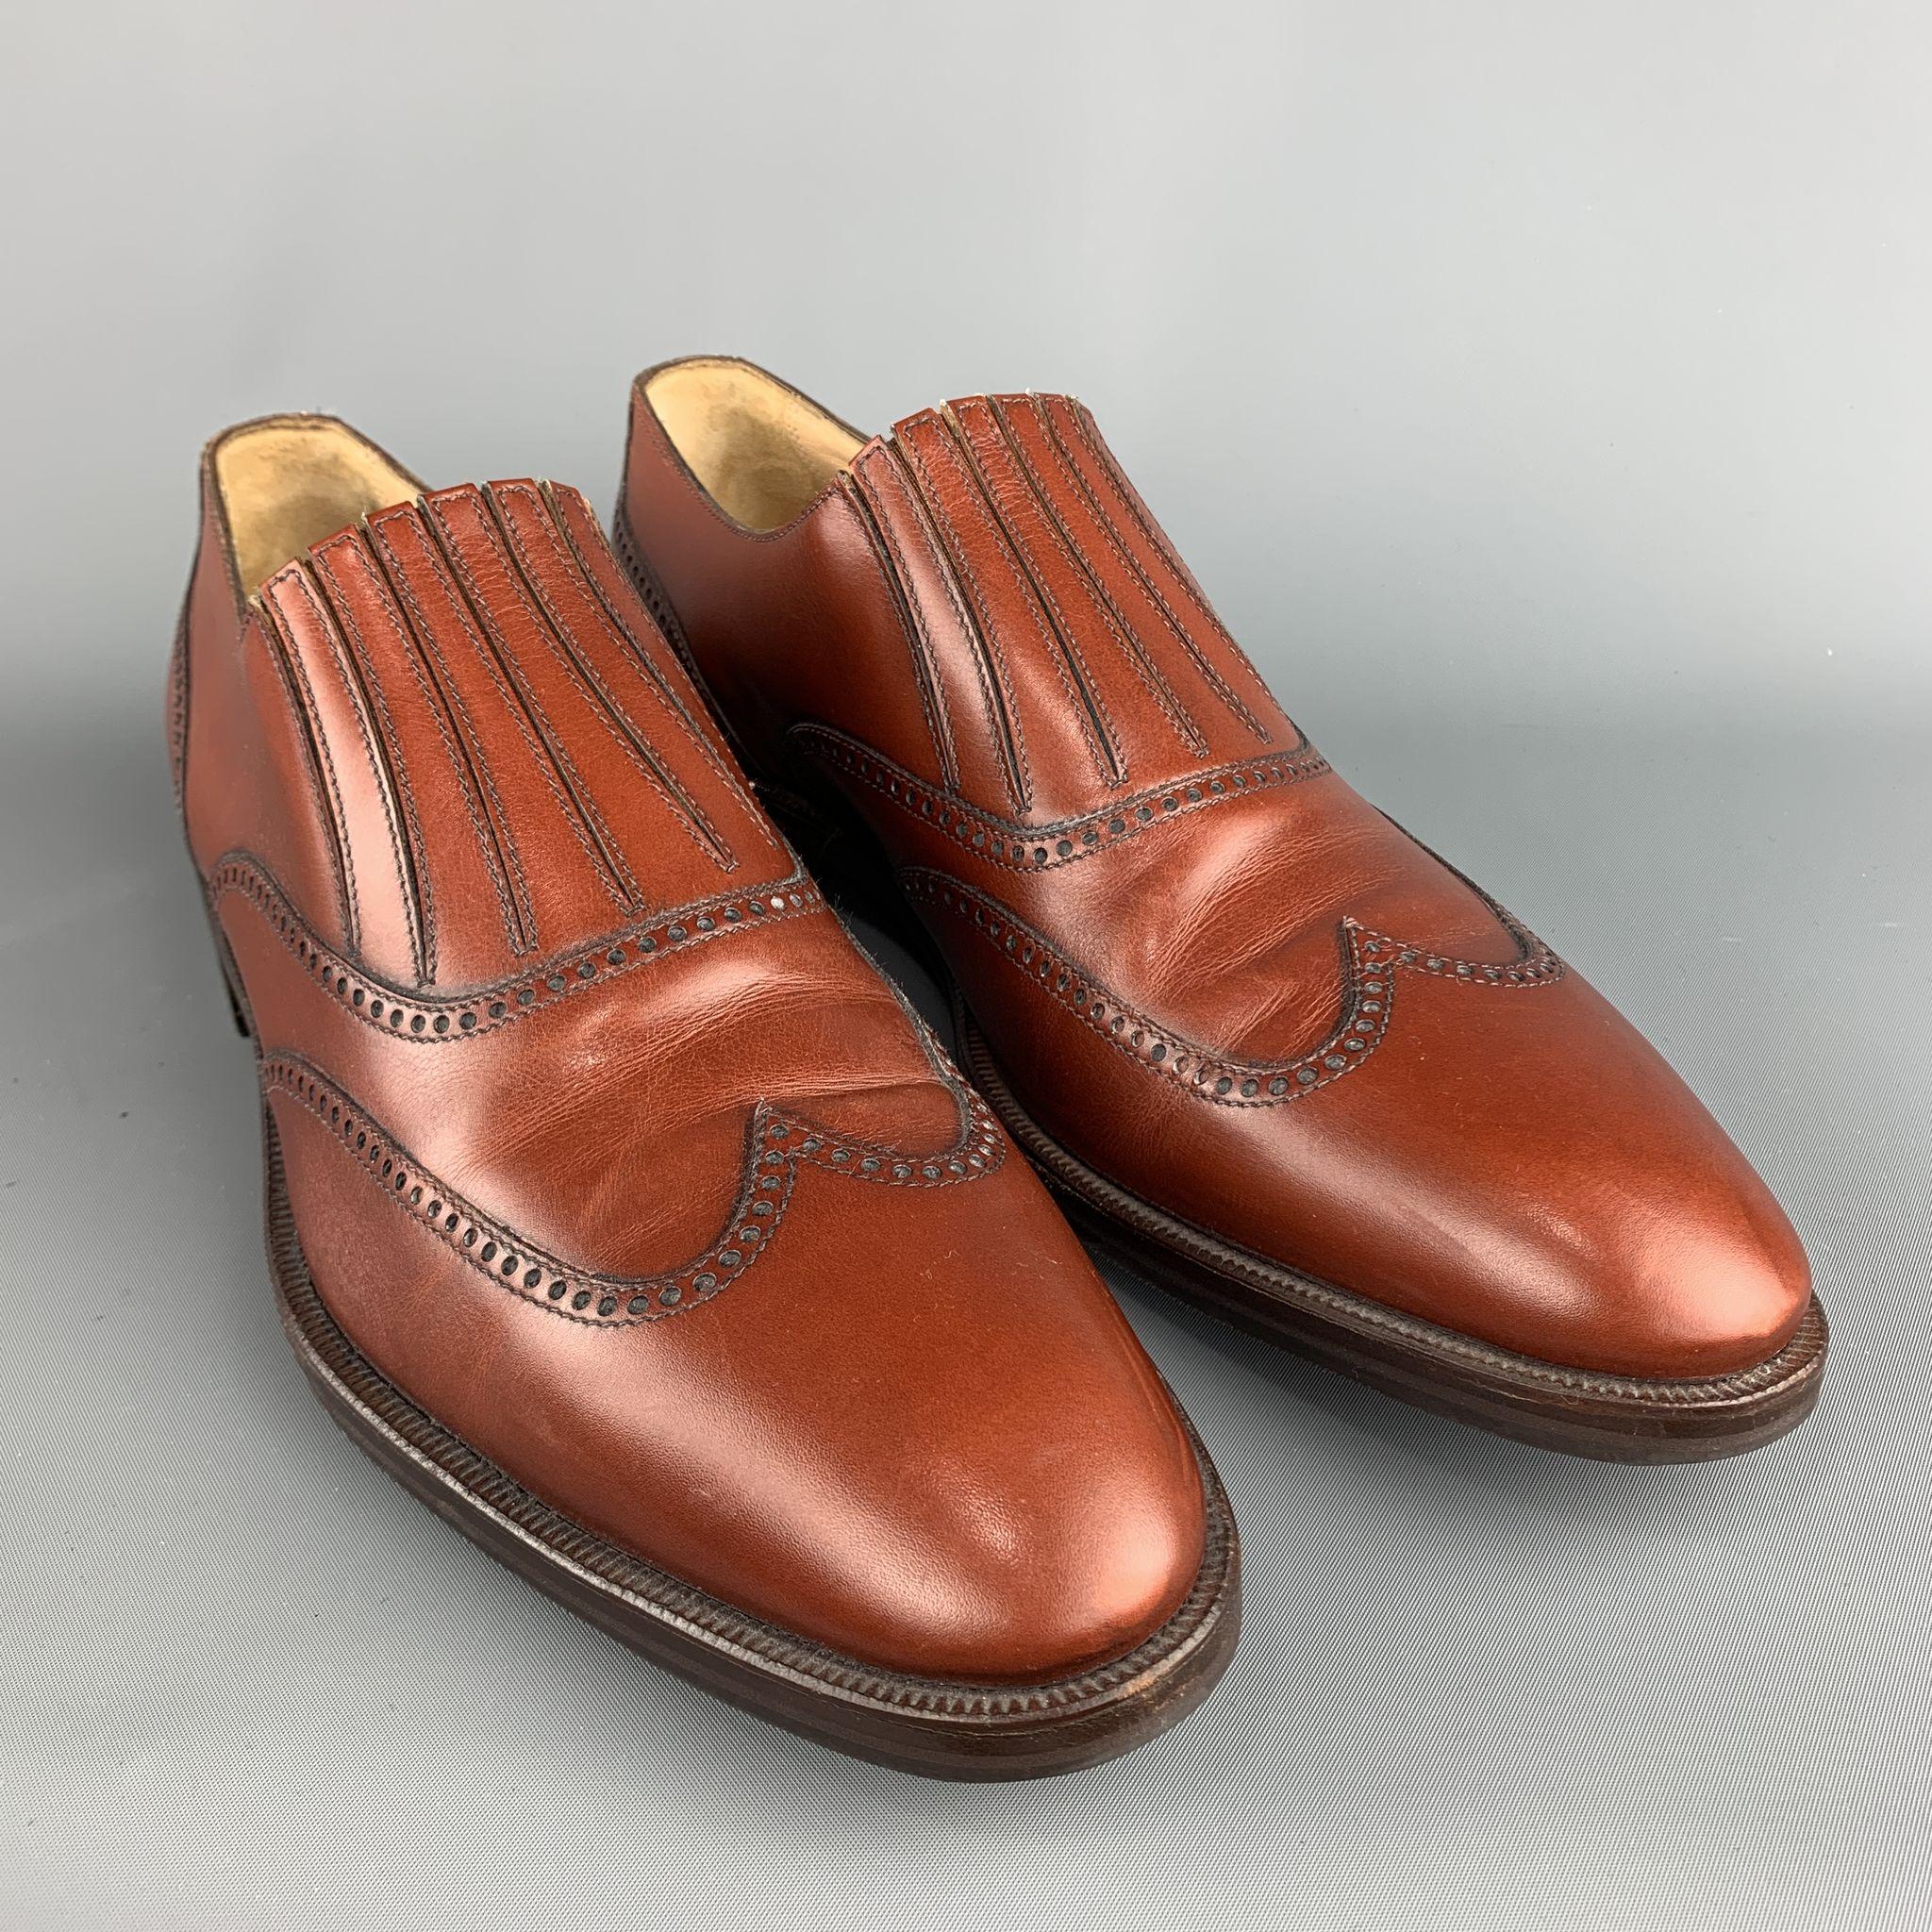 ARTHUR BEREN for GRAVATI loafers comes in a brown perforated leather featuring a wingtip style and a wooden sole. Made in Italy.
 
Excellent Pre-Owned Condition.
Marked:11
 
Measurements:
 
Outsole: 13 in. x 4.75 in.